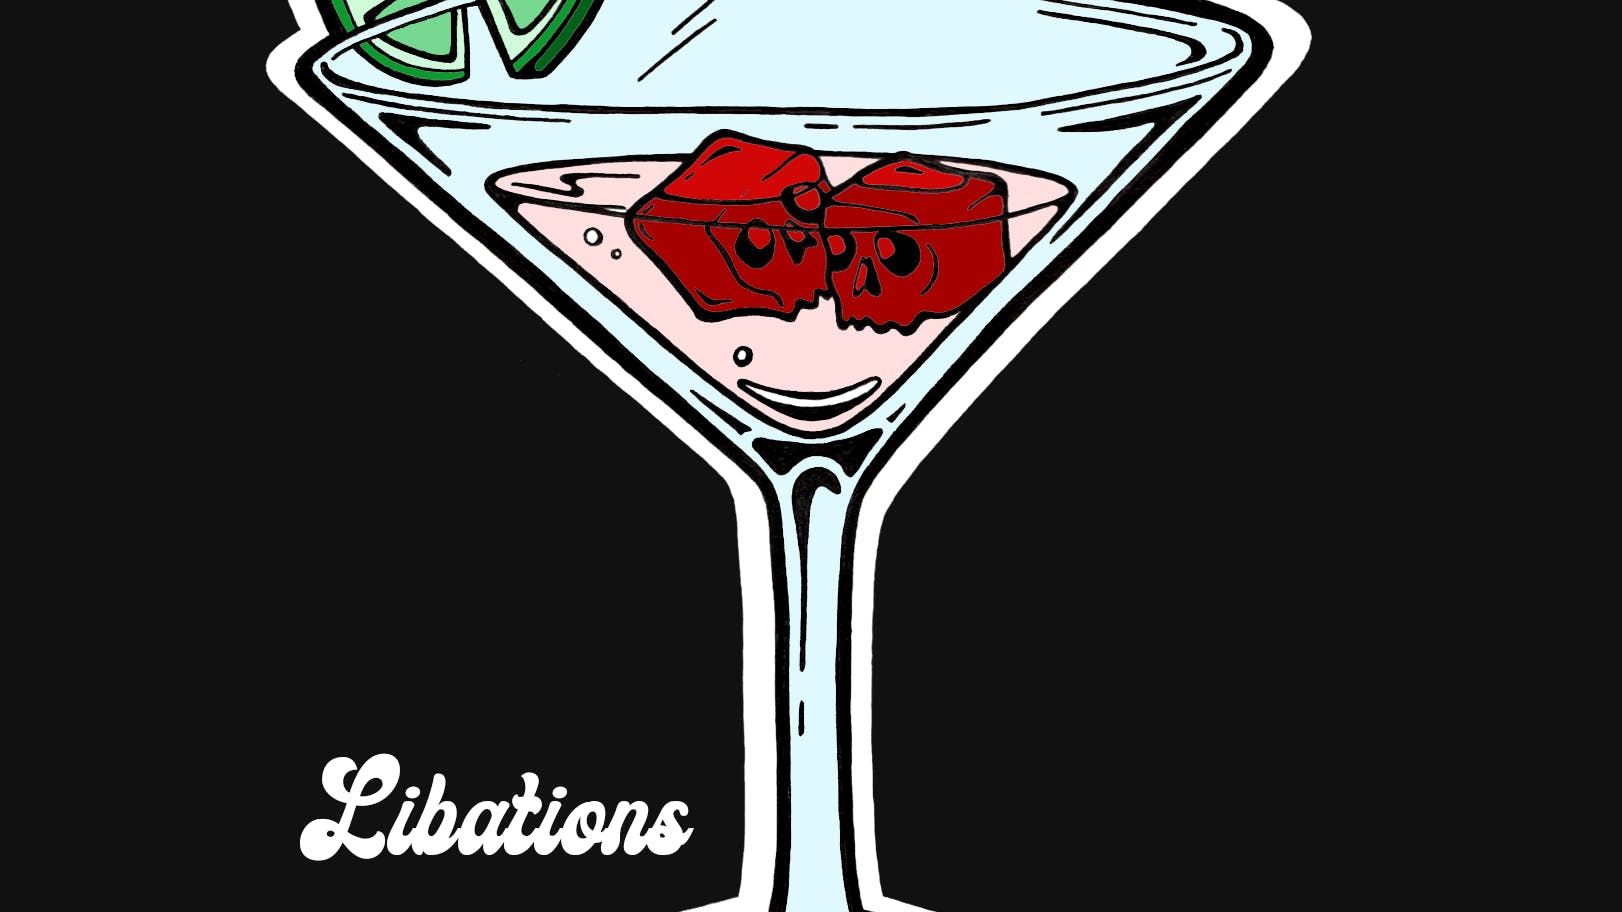 New Single ‘Libations’ out 17.03.22